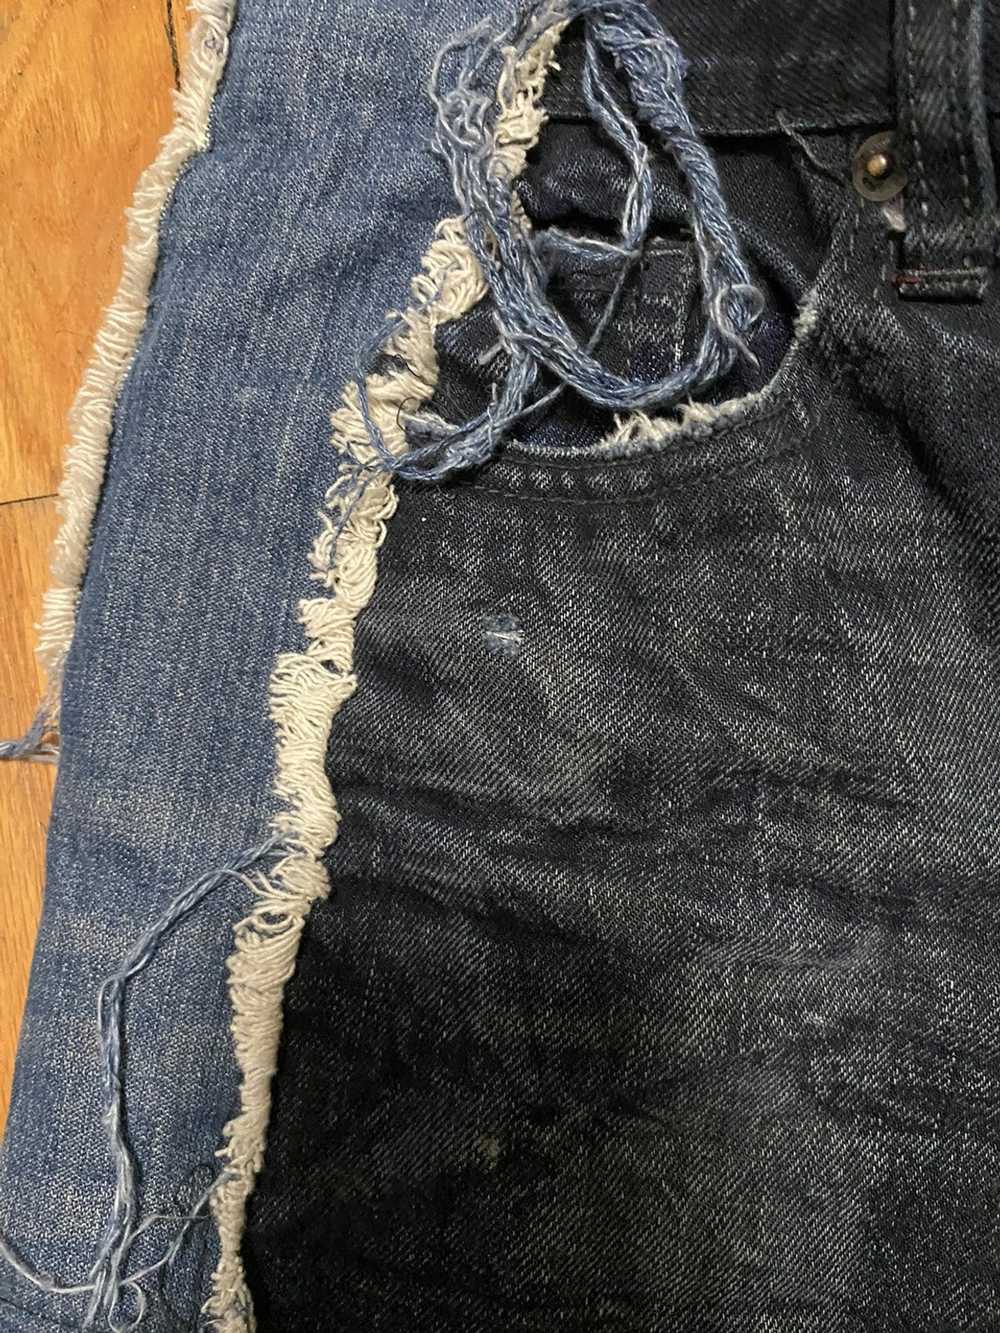 Japanese Brand Distress side patch jeans - image 3